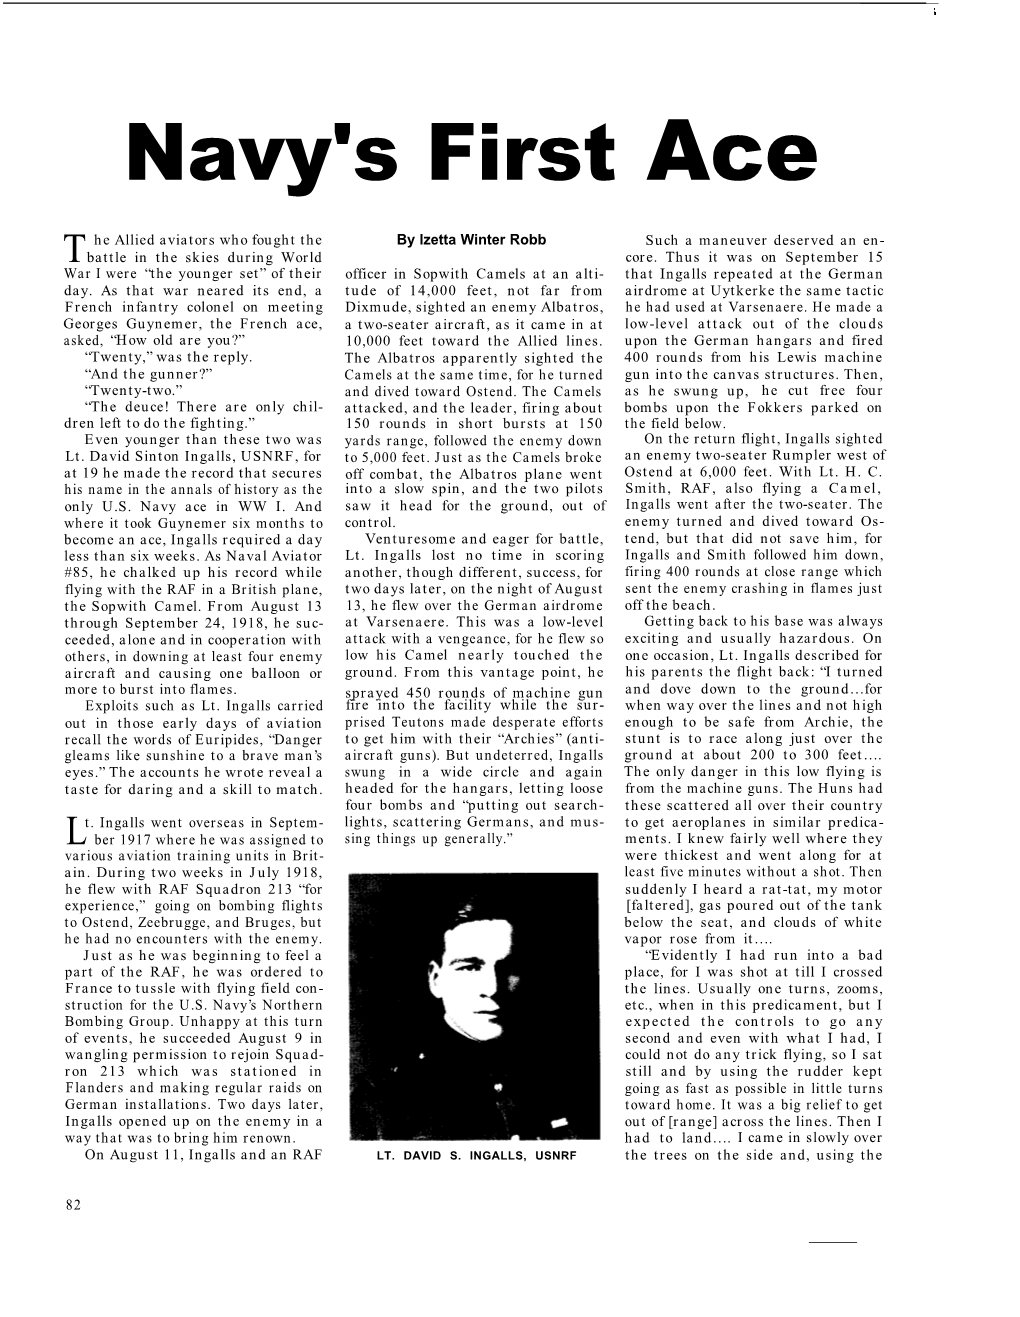 Navy's First Ace